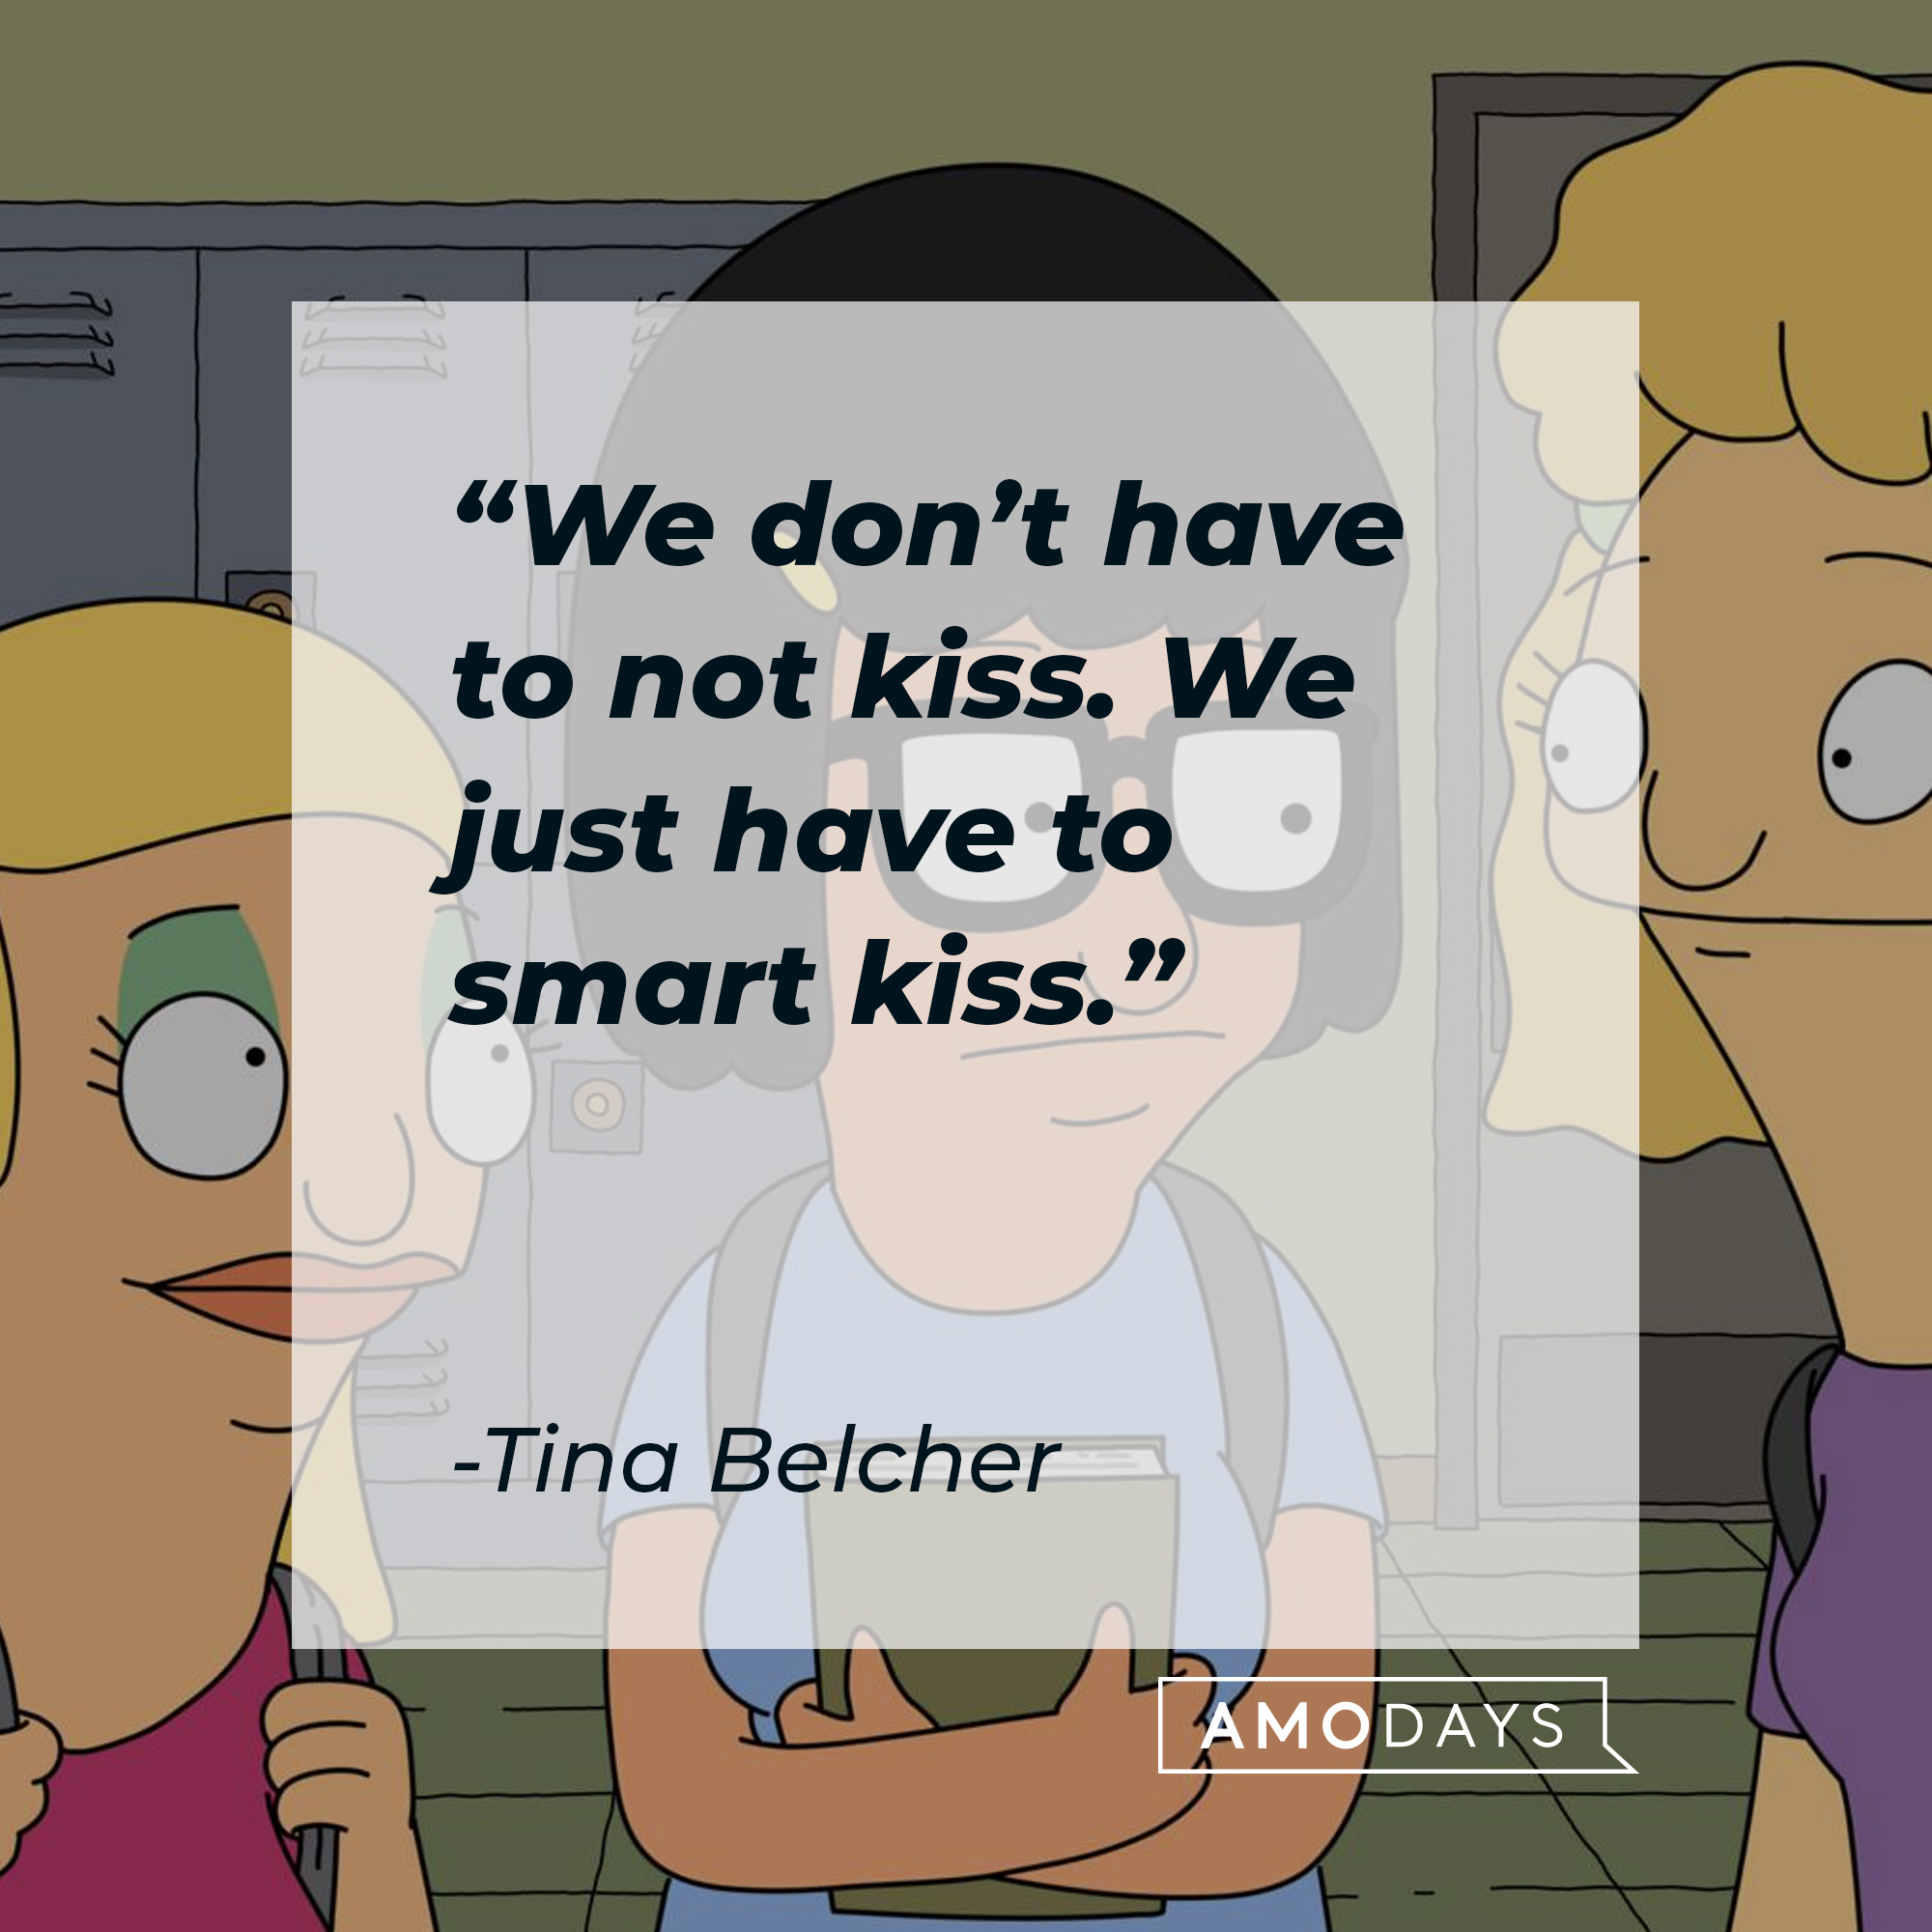 Tina Belcher, with her quote: “We don’t have to not kiss. We just have to smart kiss.” | Source: Facebook.com/BobsBurgers